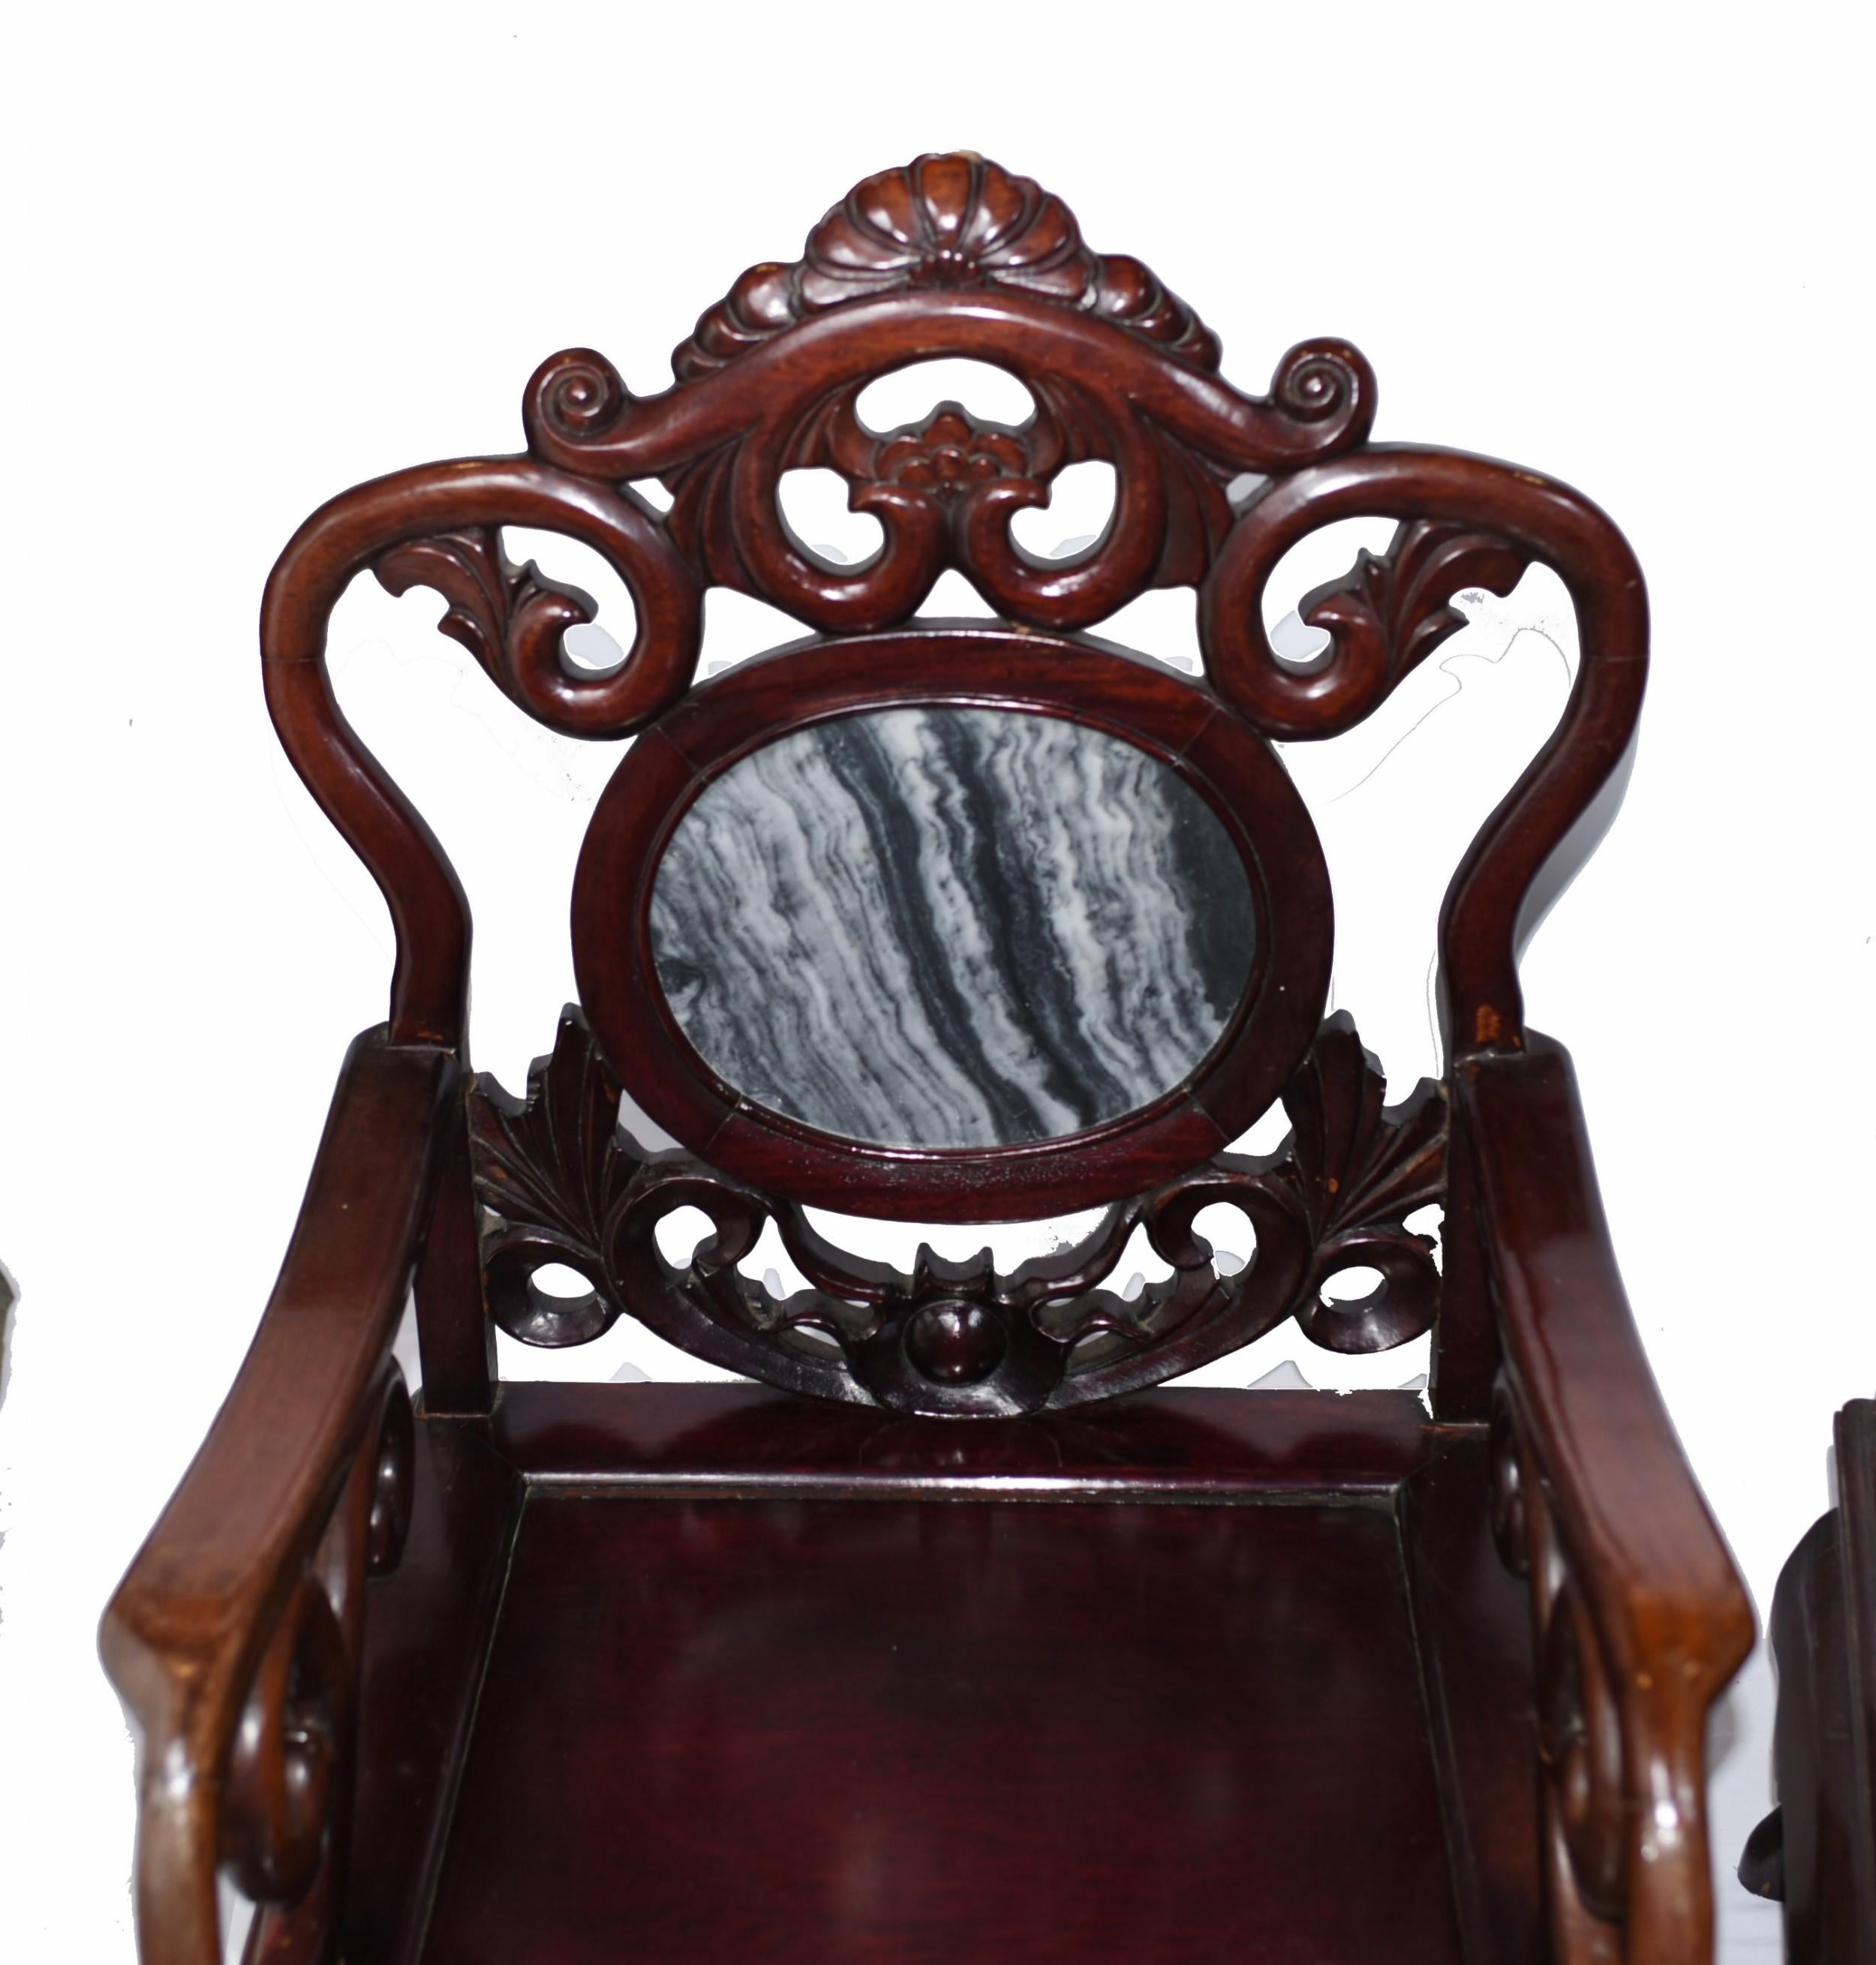 - Gorgeous pair of Chinese arm chairs in hard wood
- Great interiors pair, perfect for that Asian inspired room mixed in with other pieces
- Love the hand carved backrests with almost art nouveau look and a marble plaque
- Viewings available by